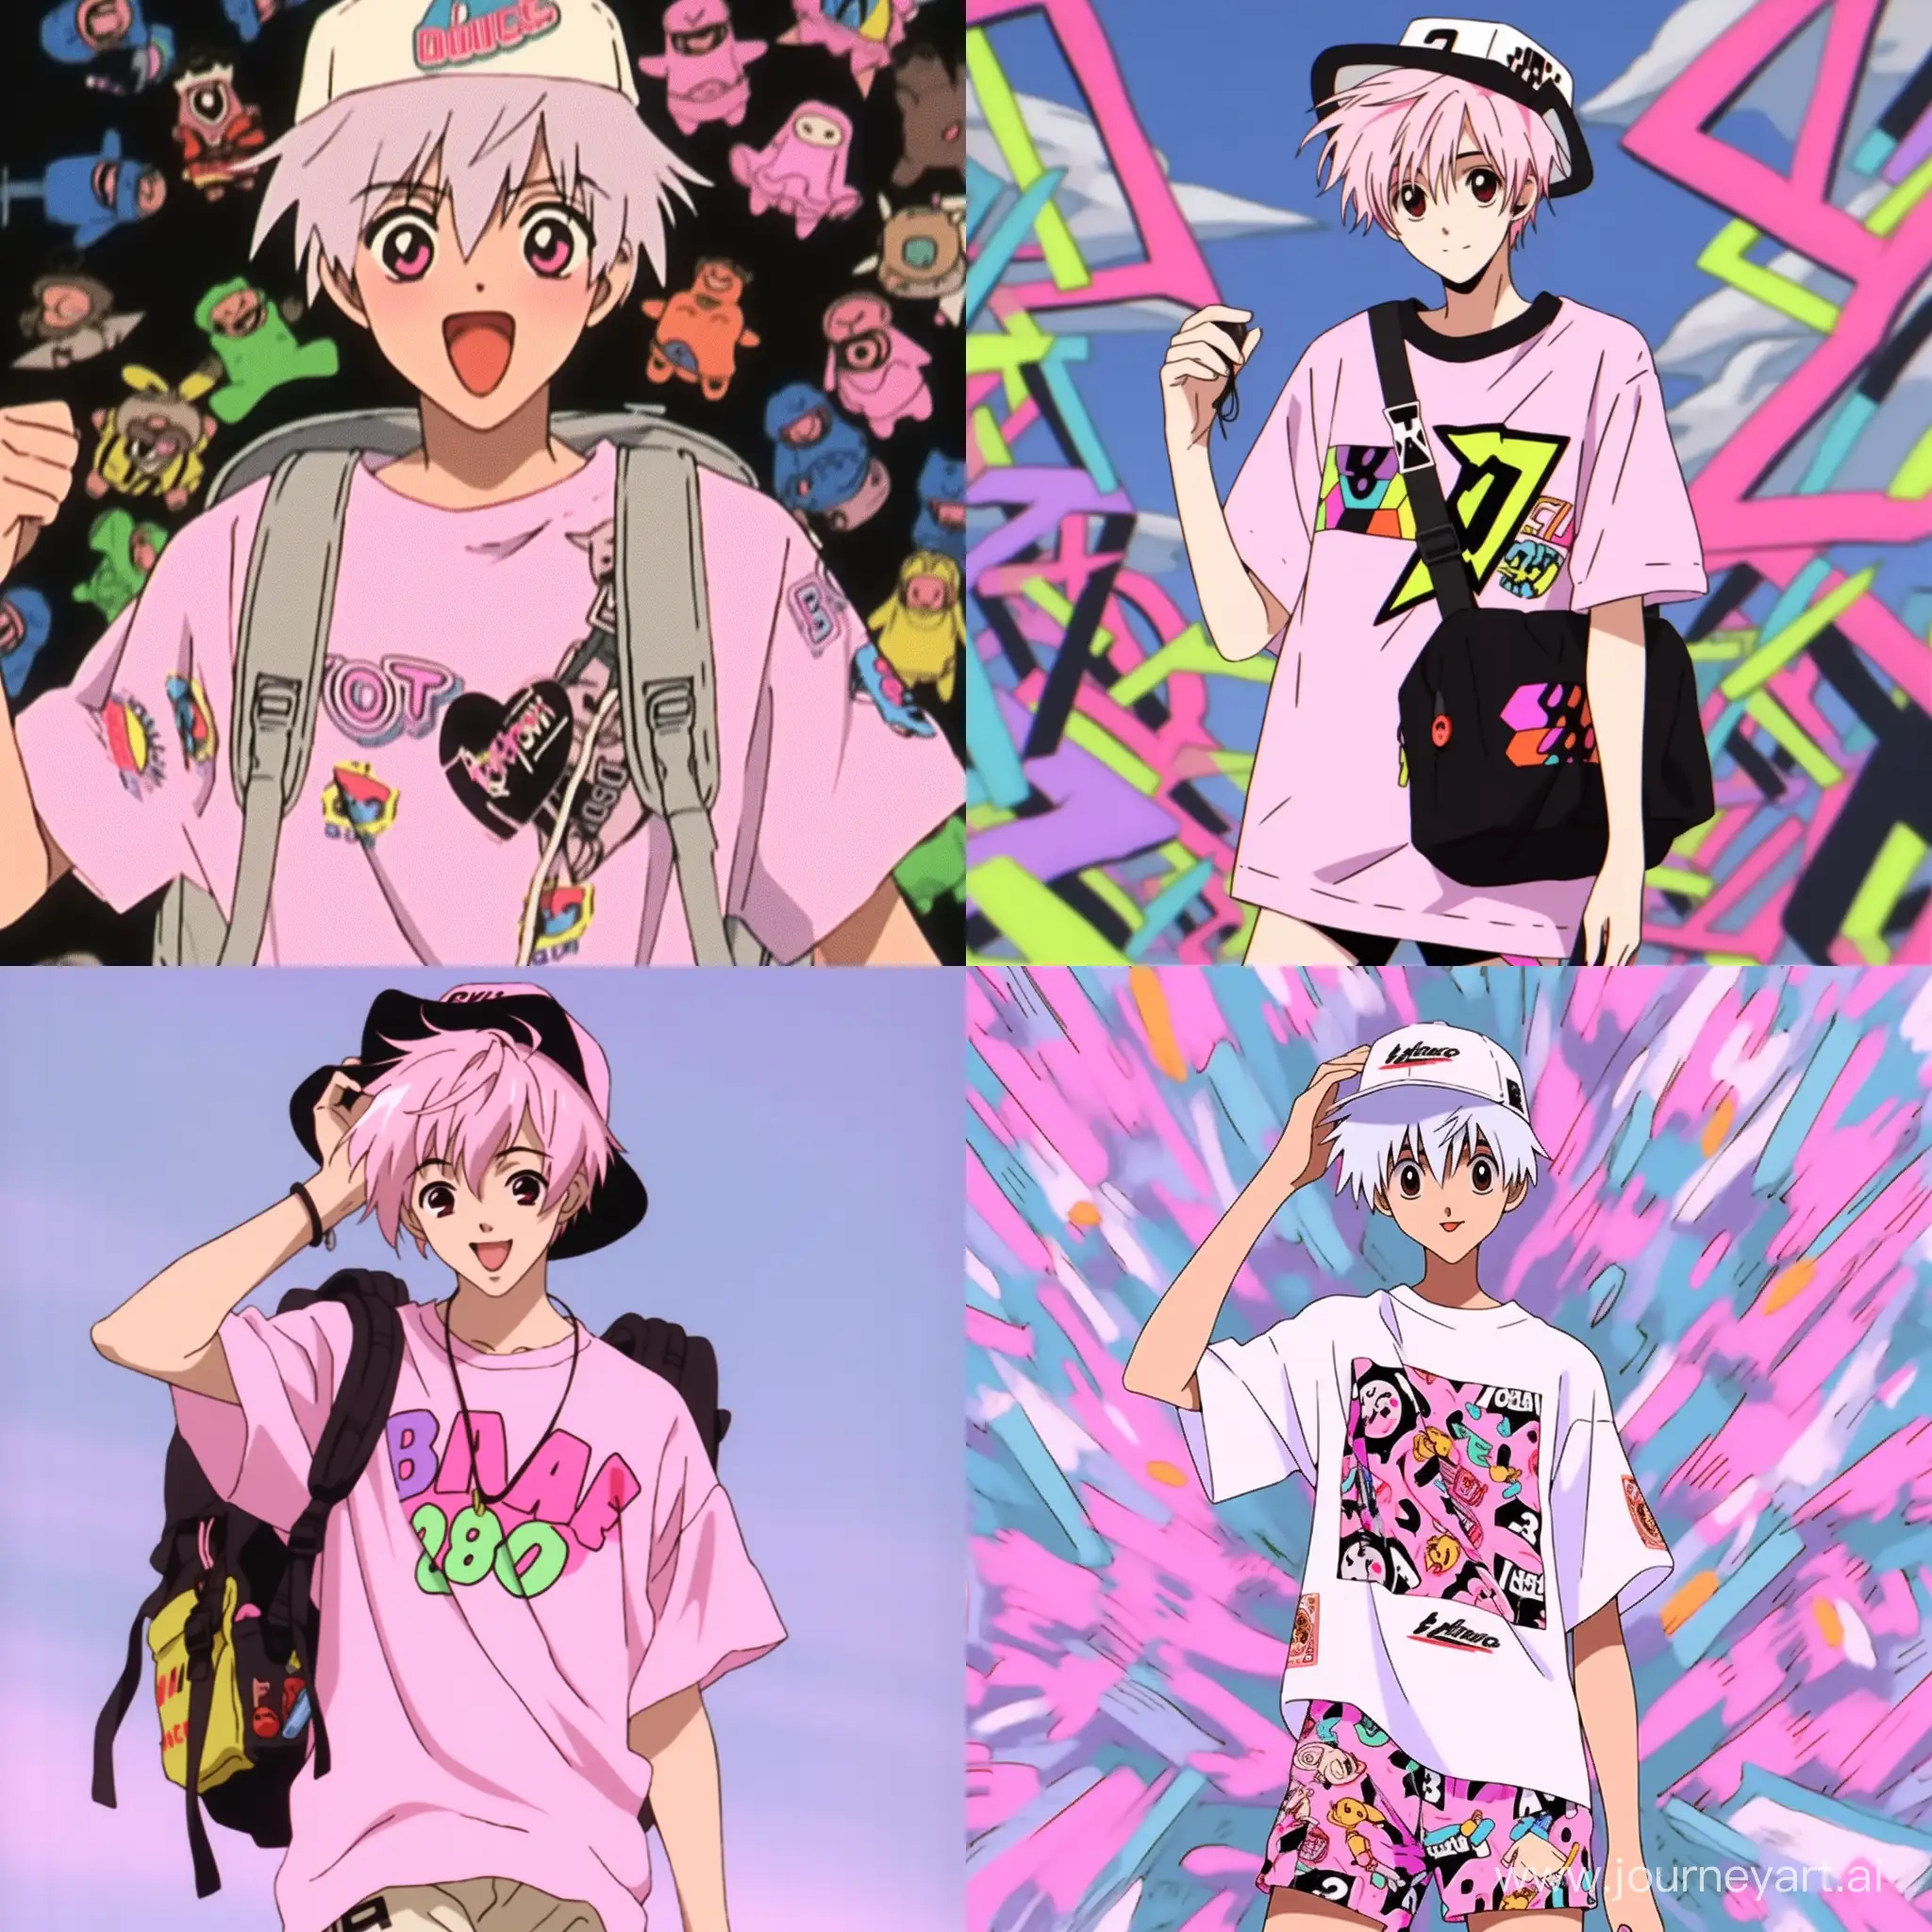 Quirky-1990s-Anime-Vibes-Solo-Character-with-Pink-Messy-Hair-and-Emojithemed-Outfit